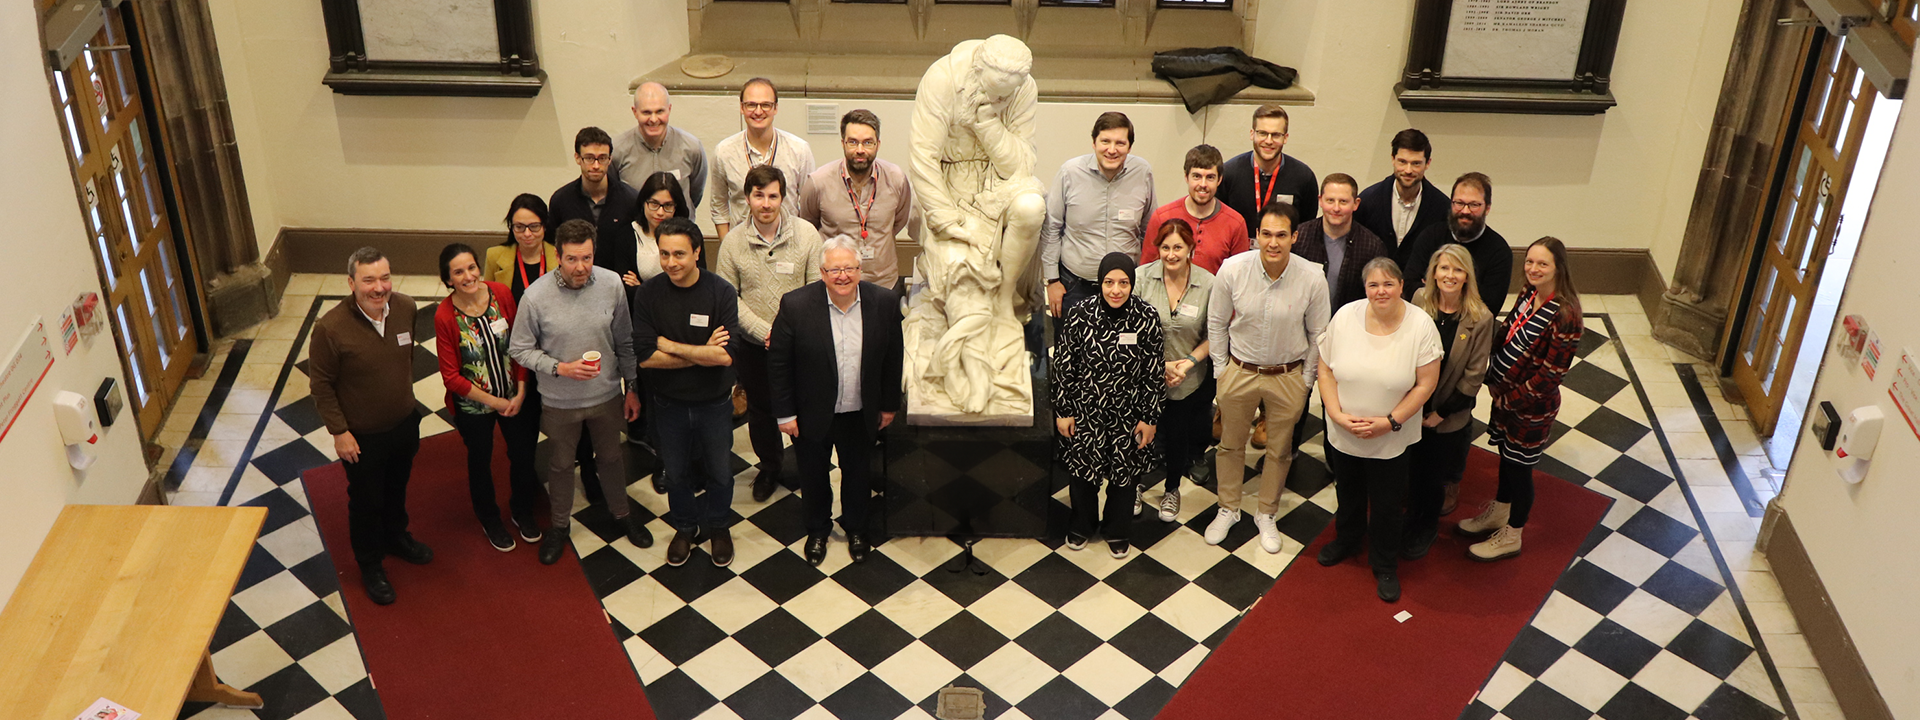 Several members of the QUB Fellowship Academy standing in the Black and White hall, beside a statue looking up.